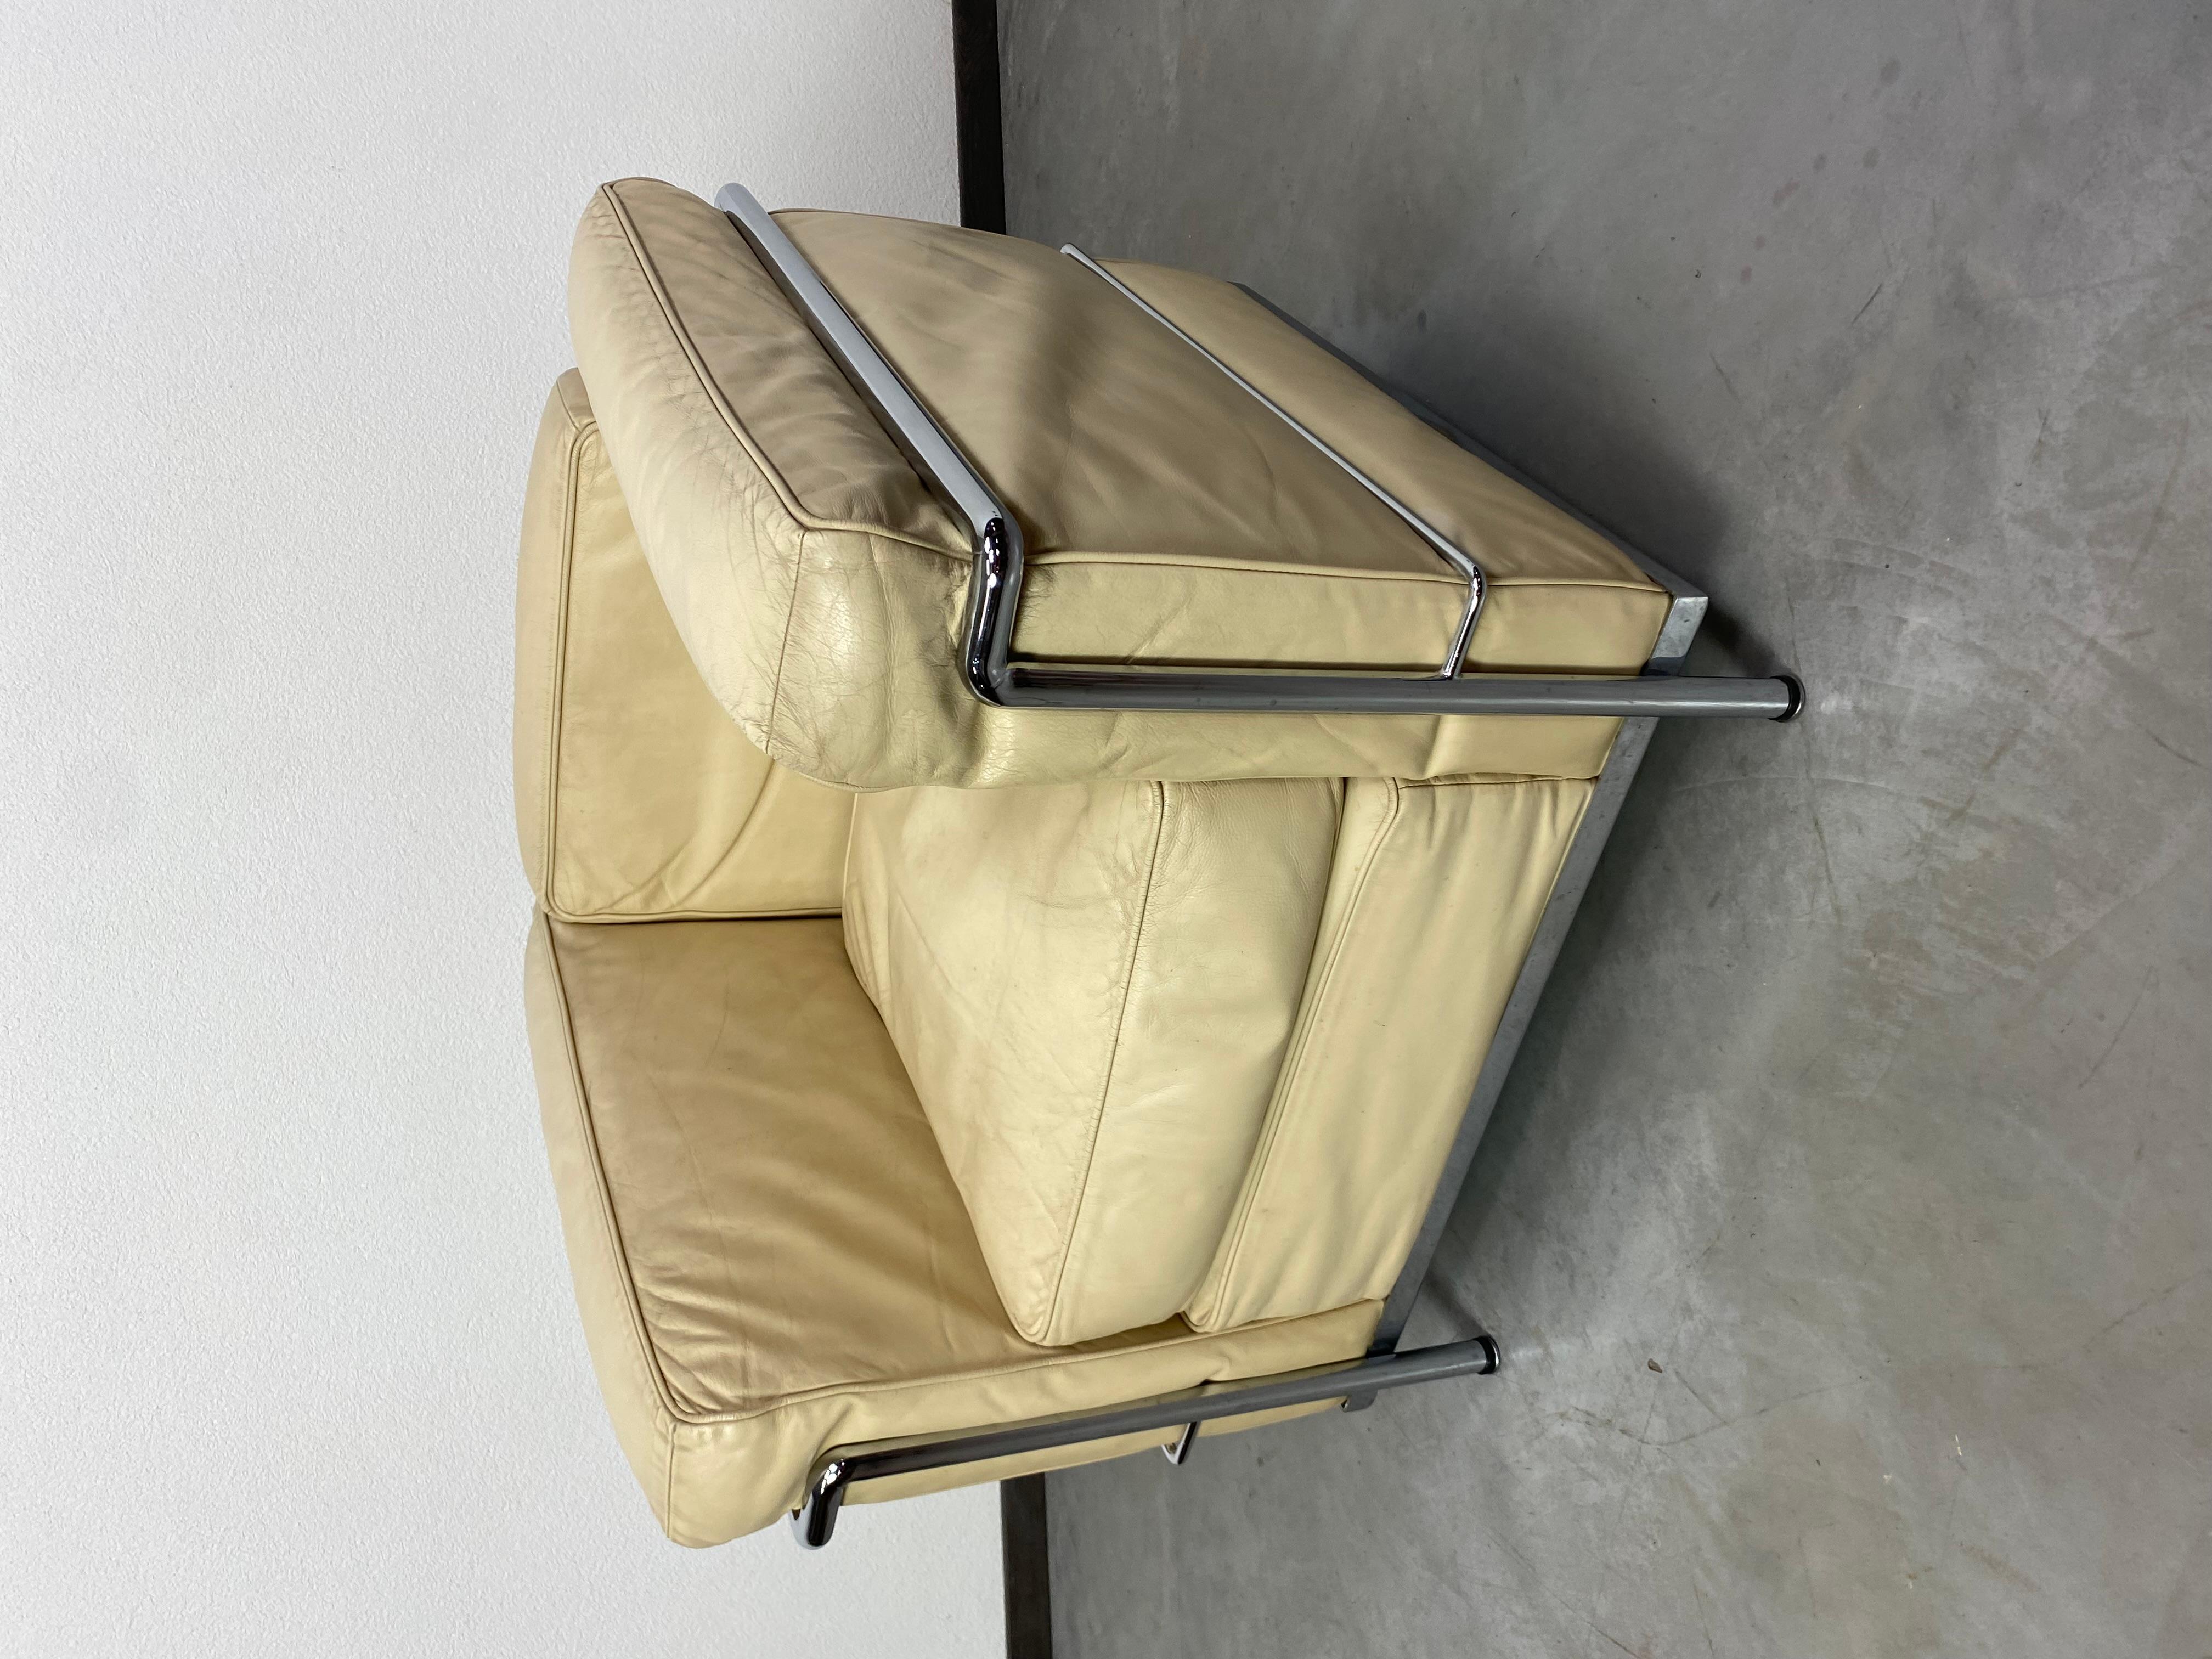 White leather club chairs LC2 by Le Corbusier for Cassina In Good Condition For Sale In Banská Štiavnica, SK